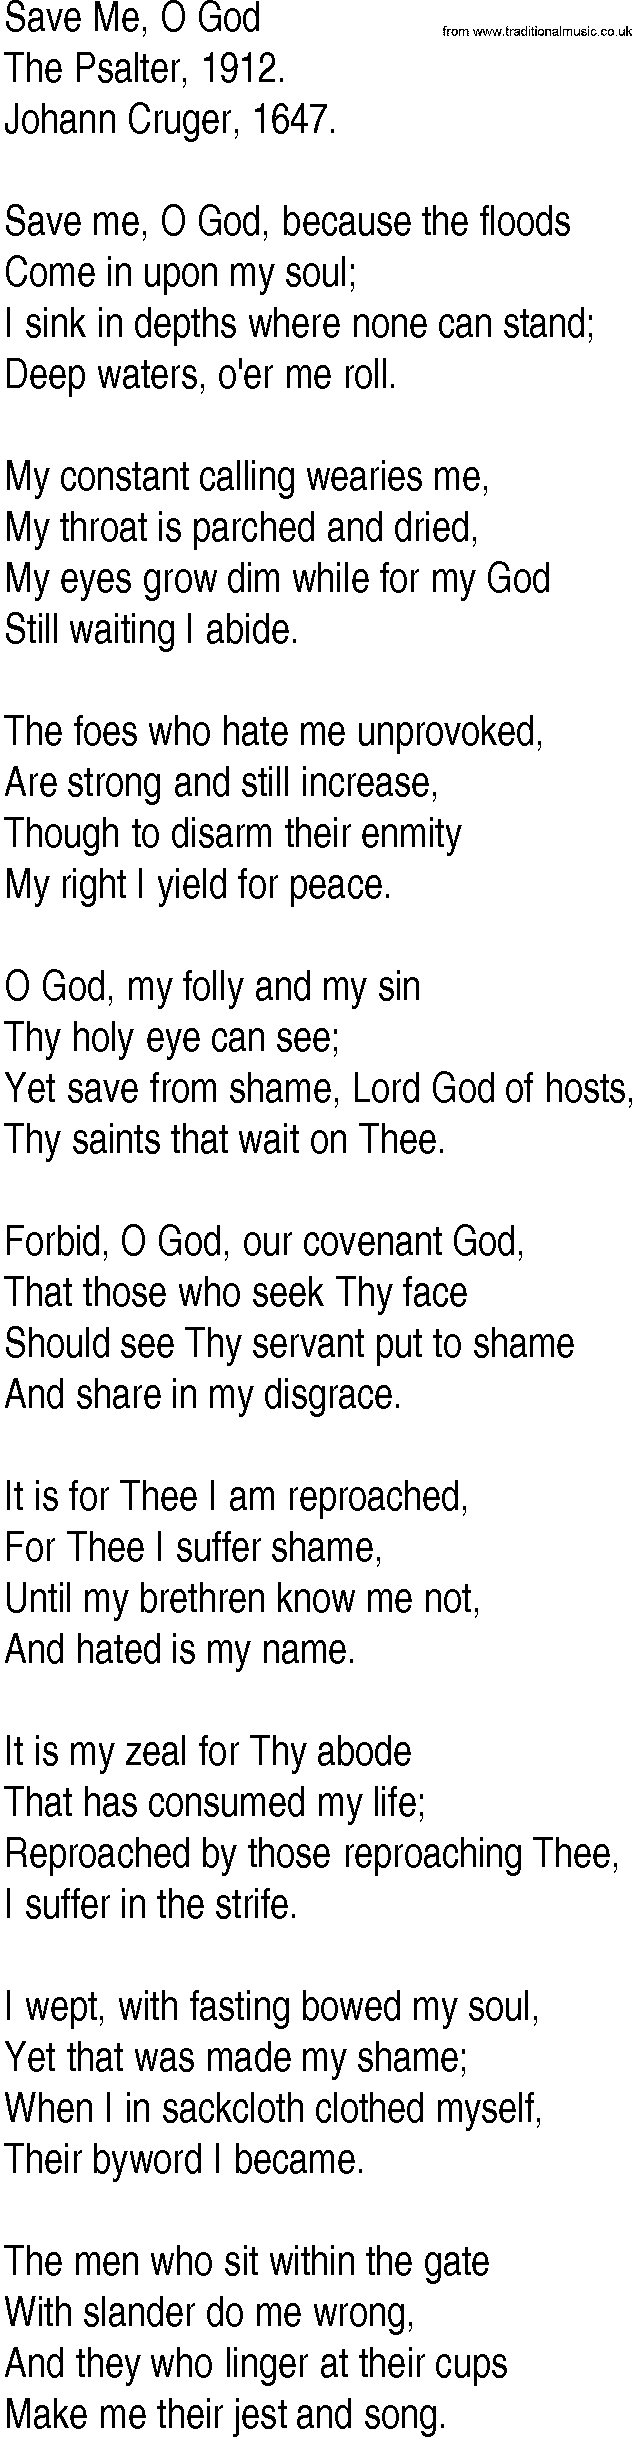 Hymn and Gospel Song: Save Me, O God by The Psalter lyrics